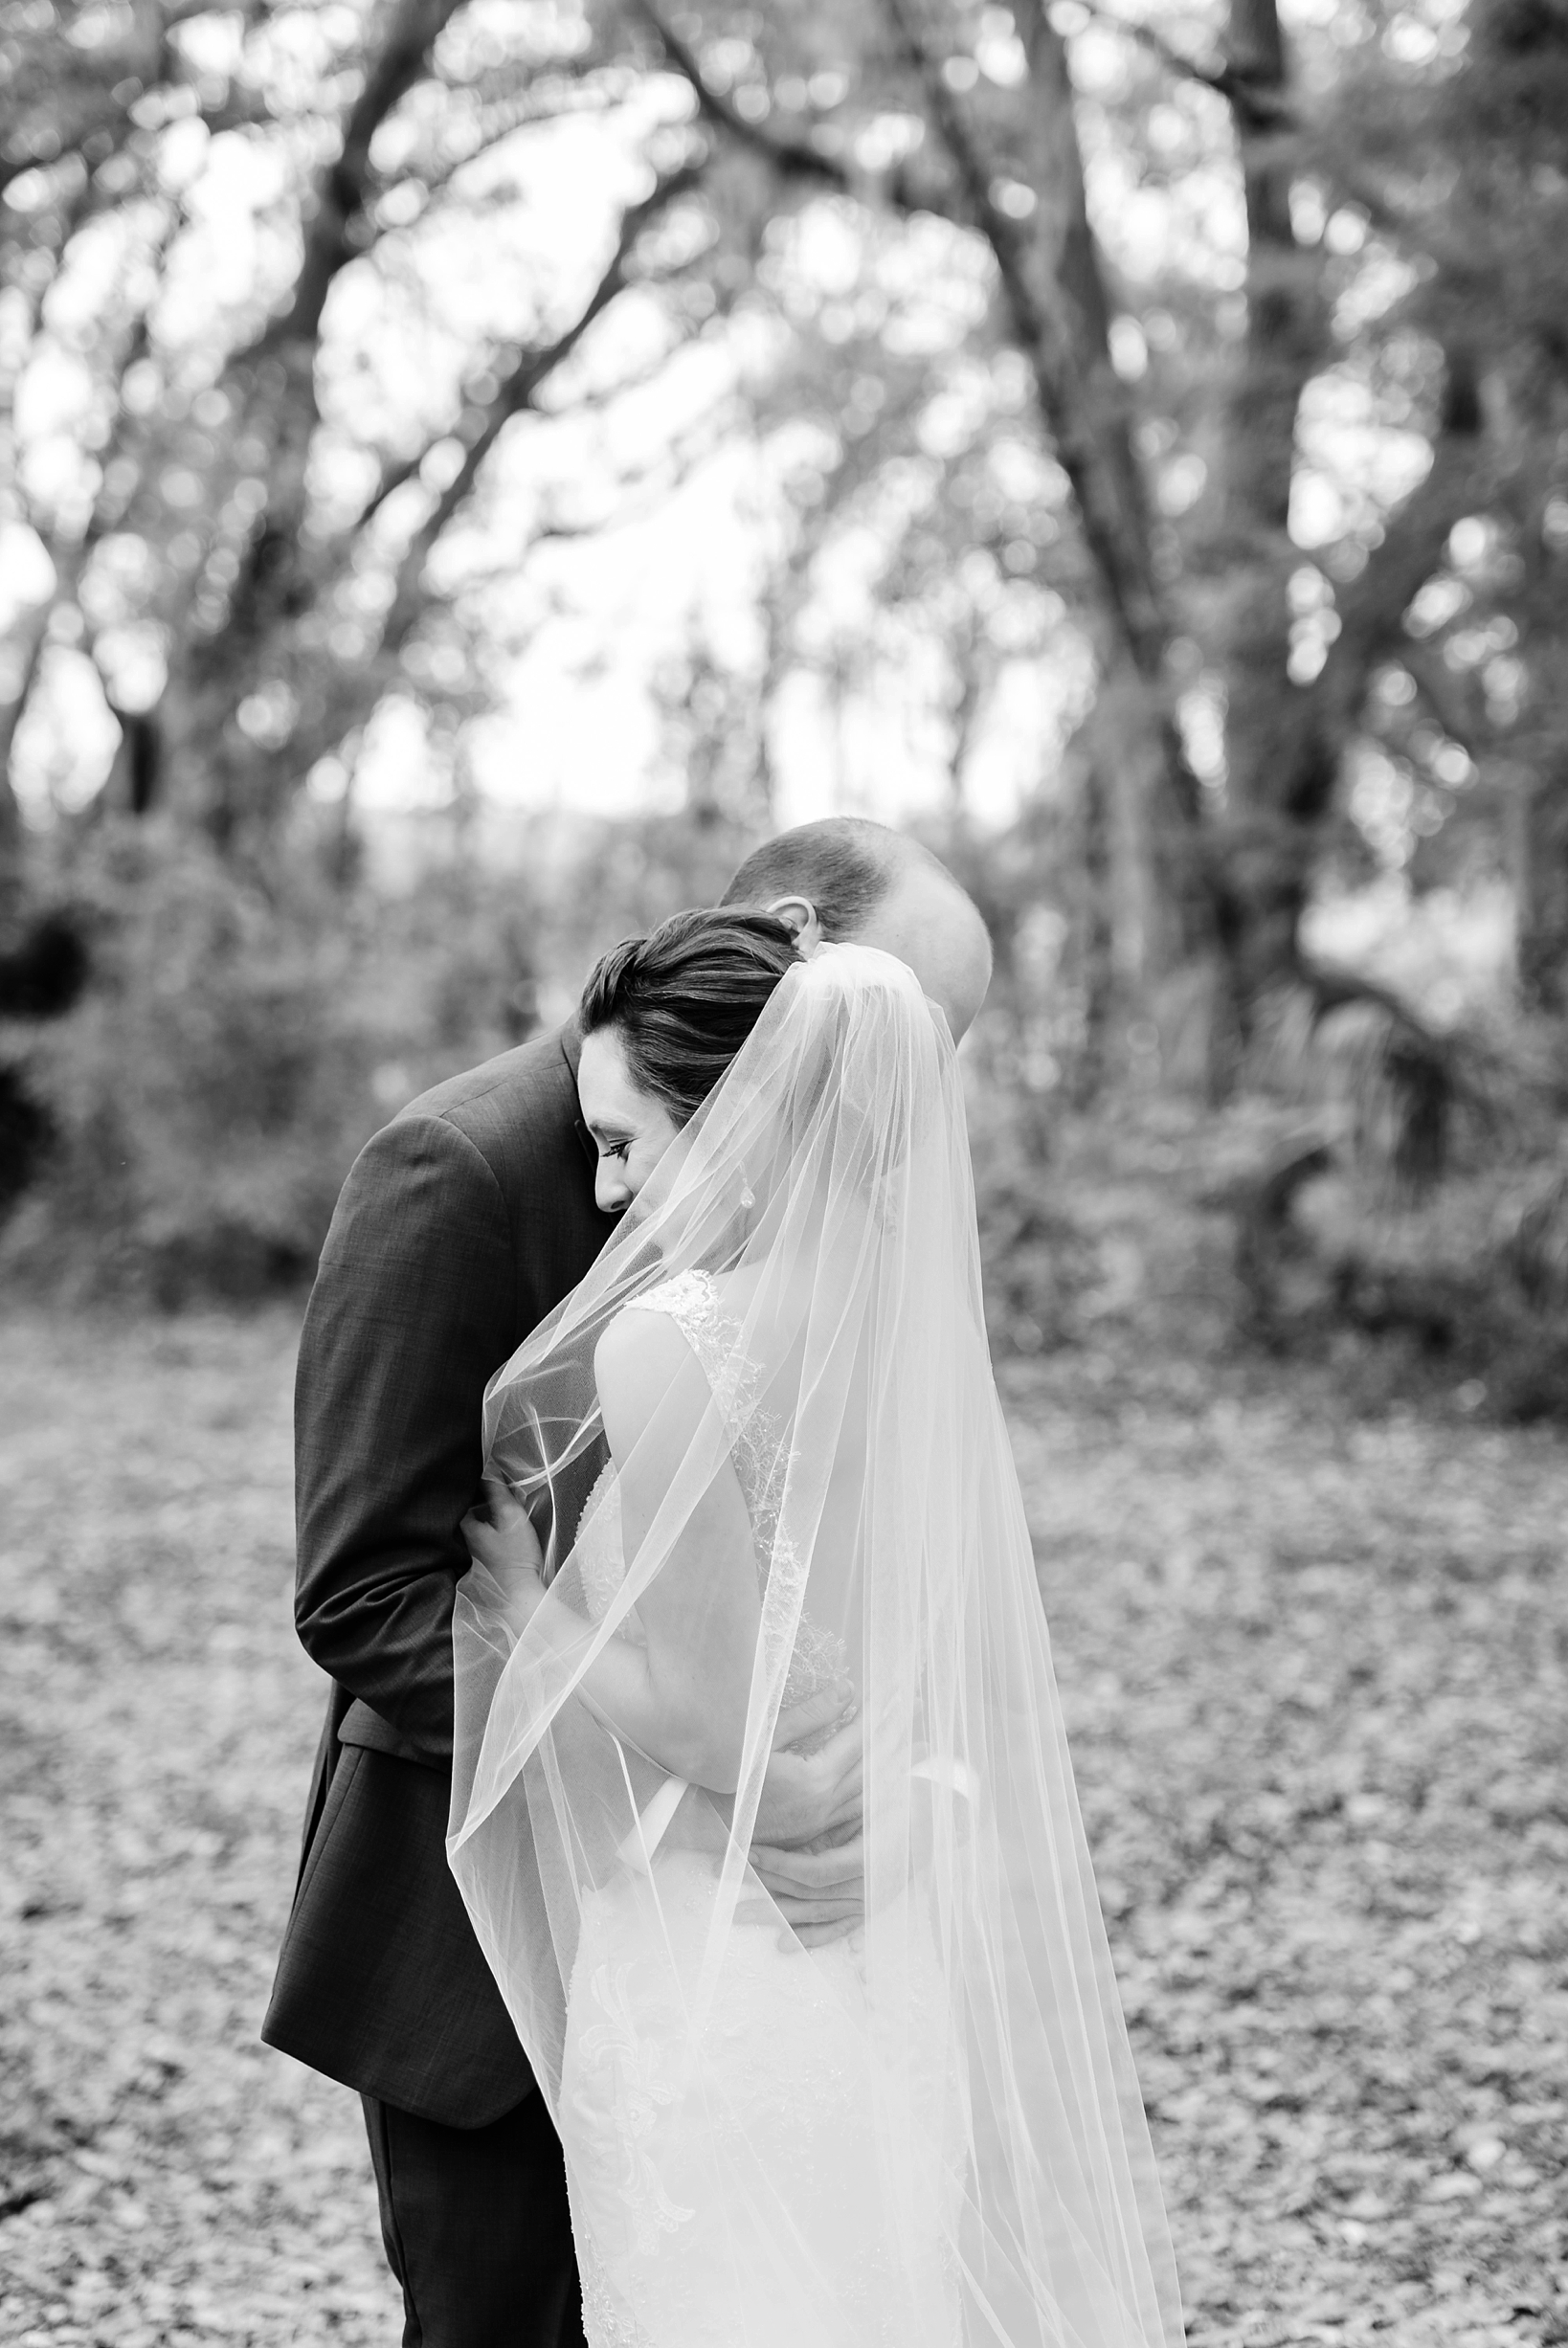 Bride and groom embracing in a timeless black and white photo by Sarah & Ben Photography